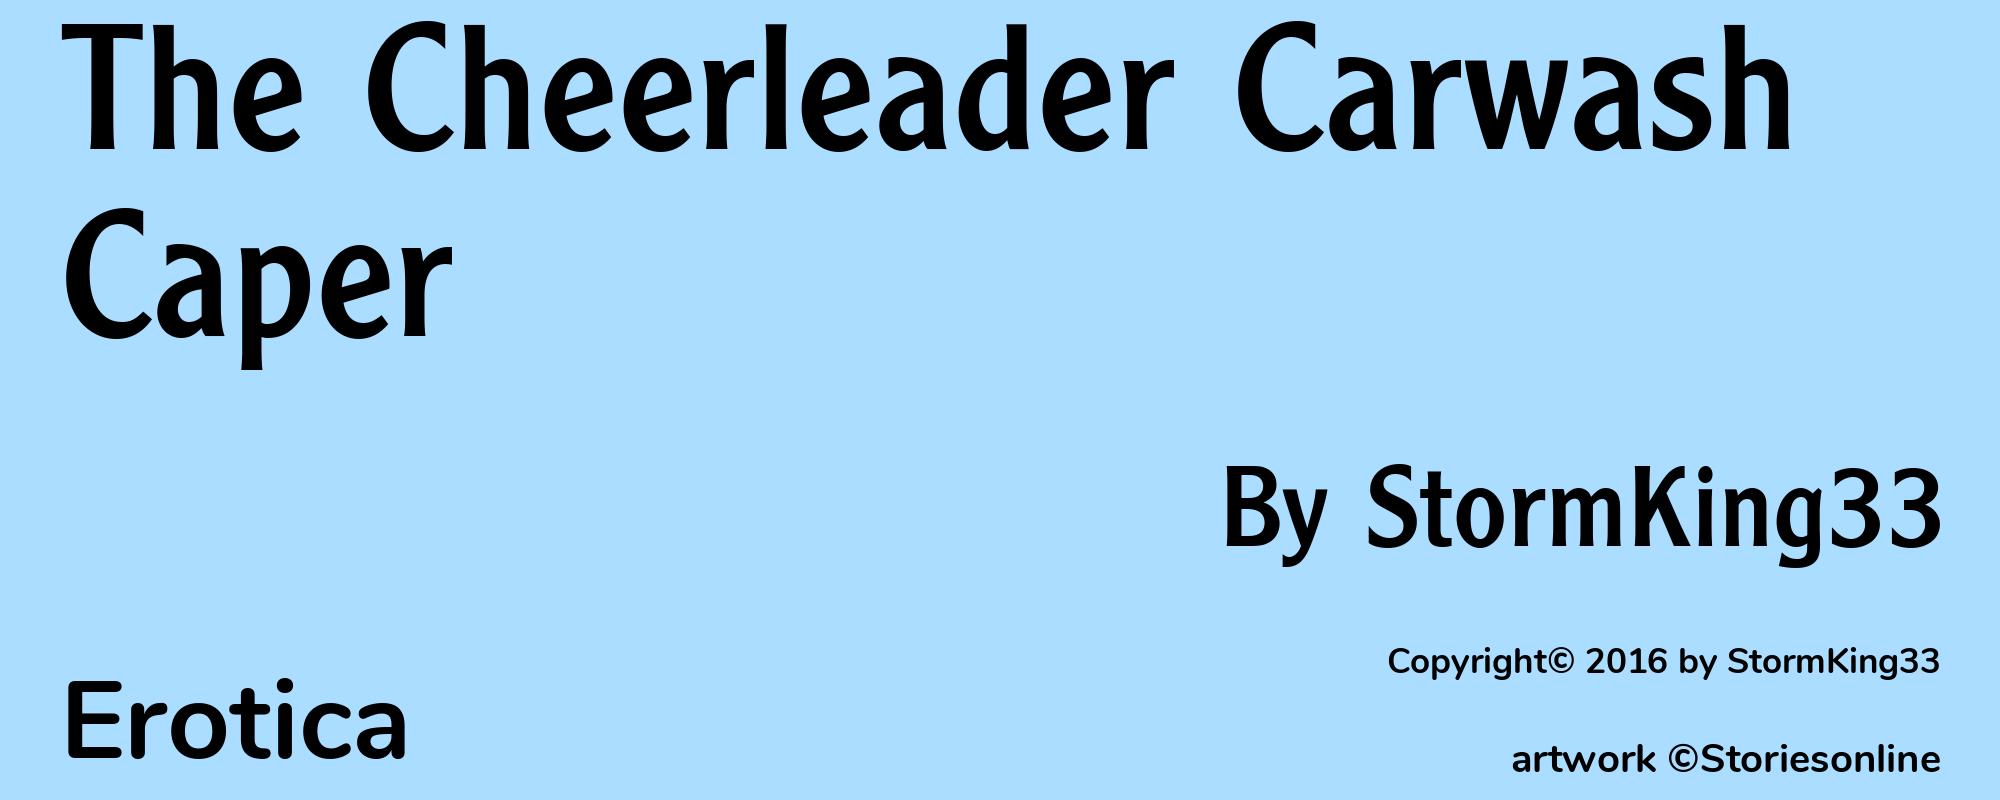 The Cheerleader Carwash Caper - Cover